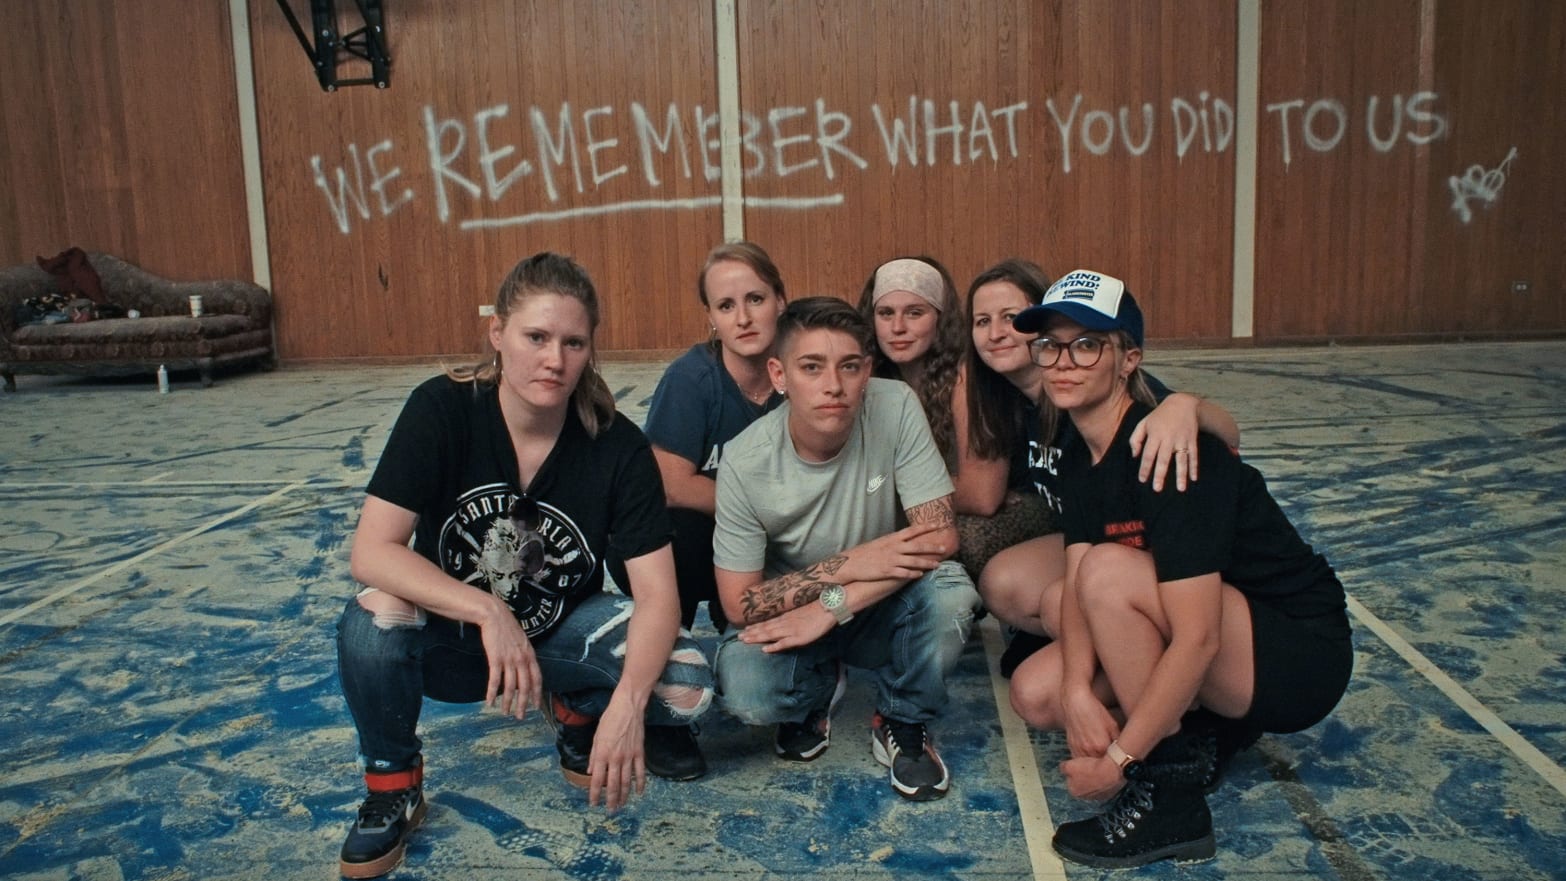 A group of women crowd together to pose for a picture in a room where the phase "we remember what you did to us" is spray painted on the walls